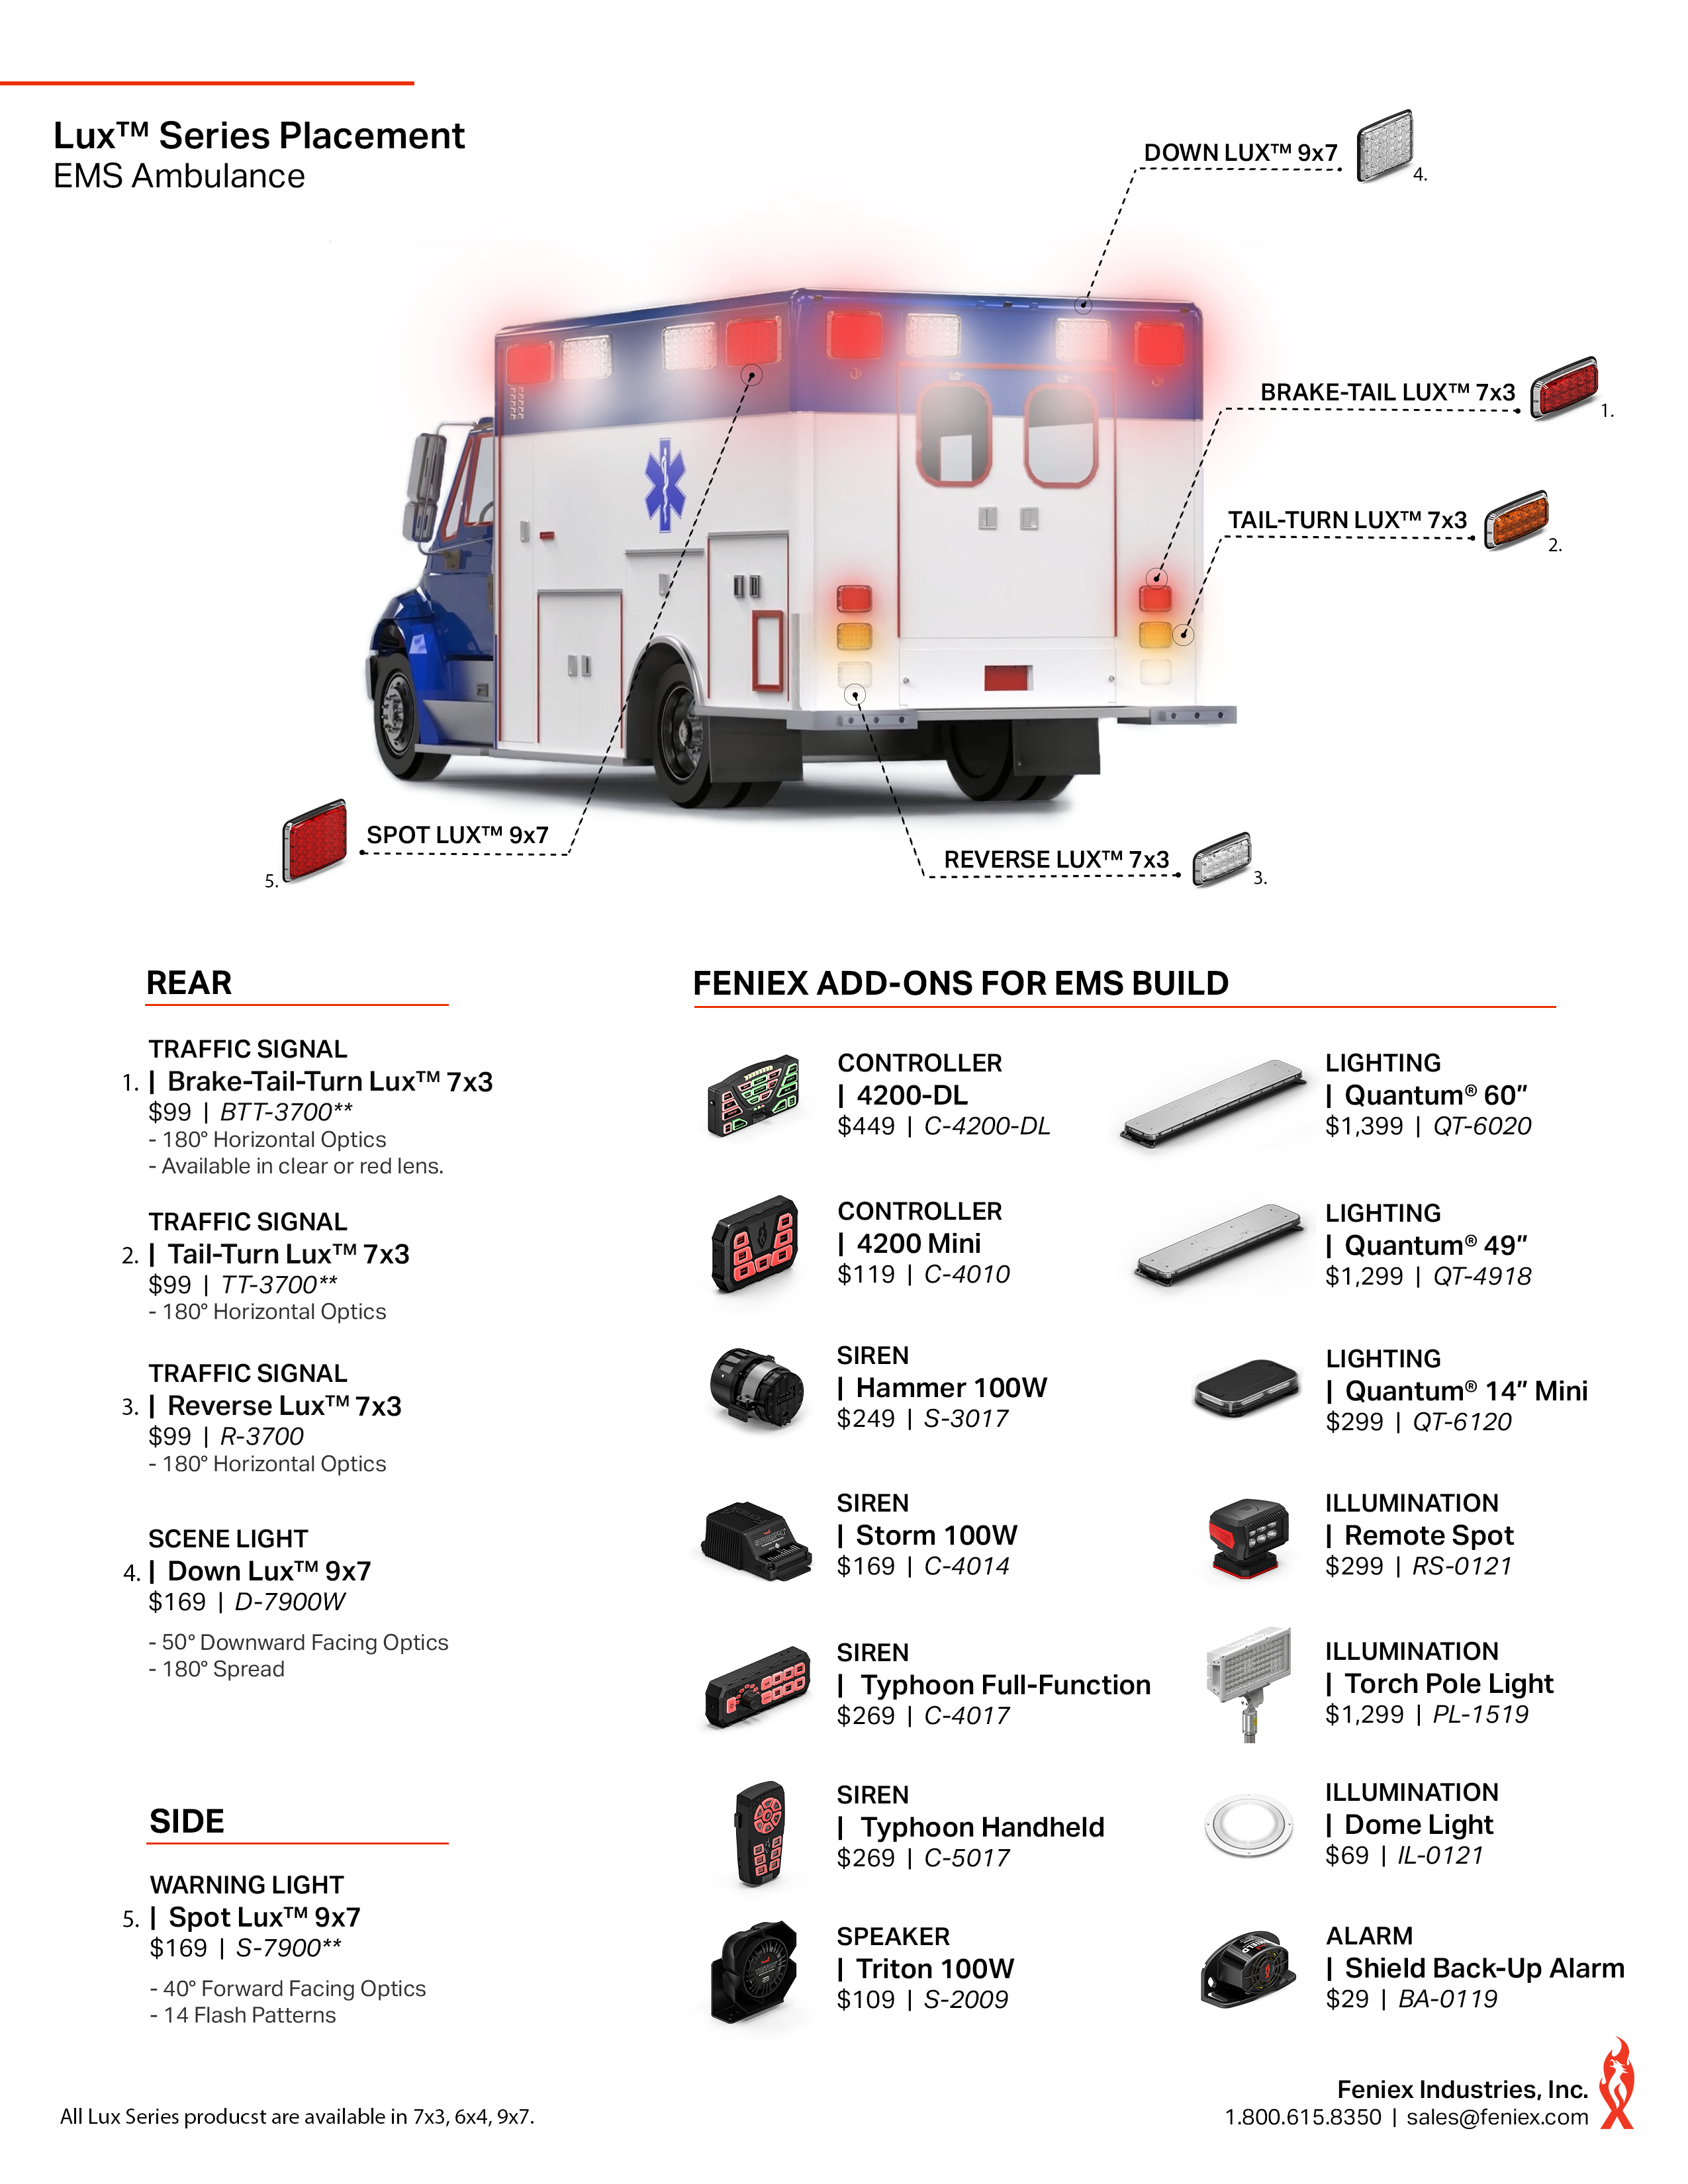 Lux Series Ambulance Infographic FINAL